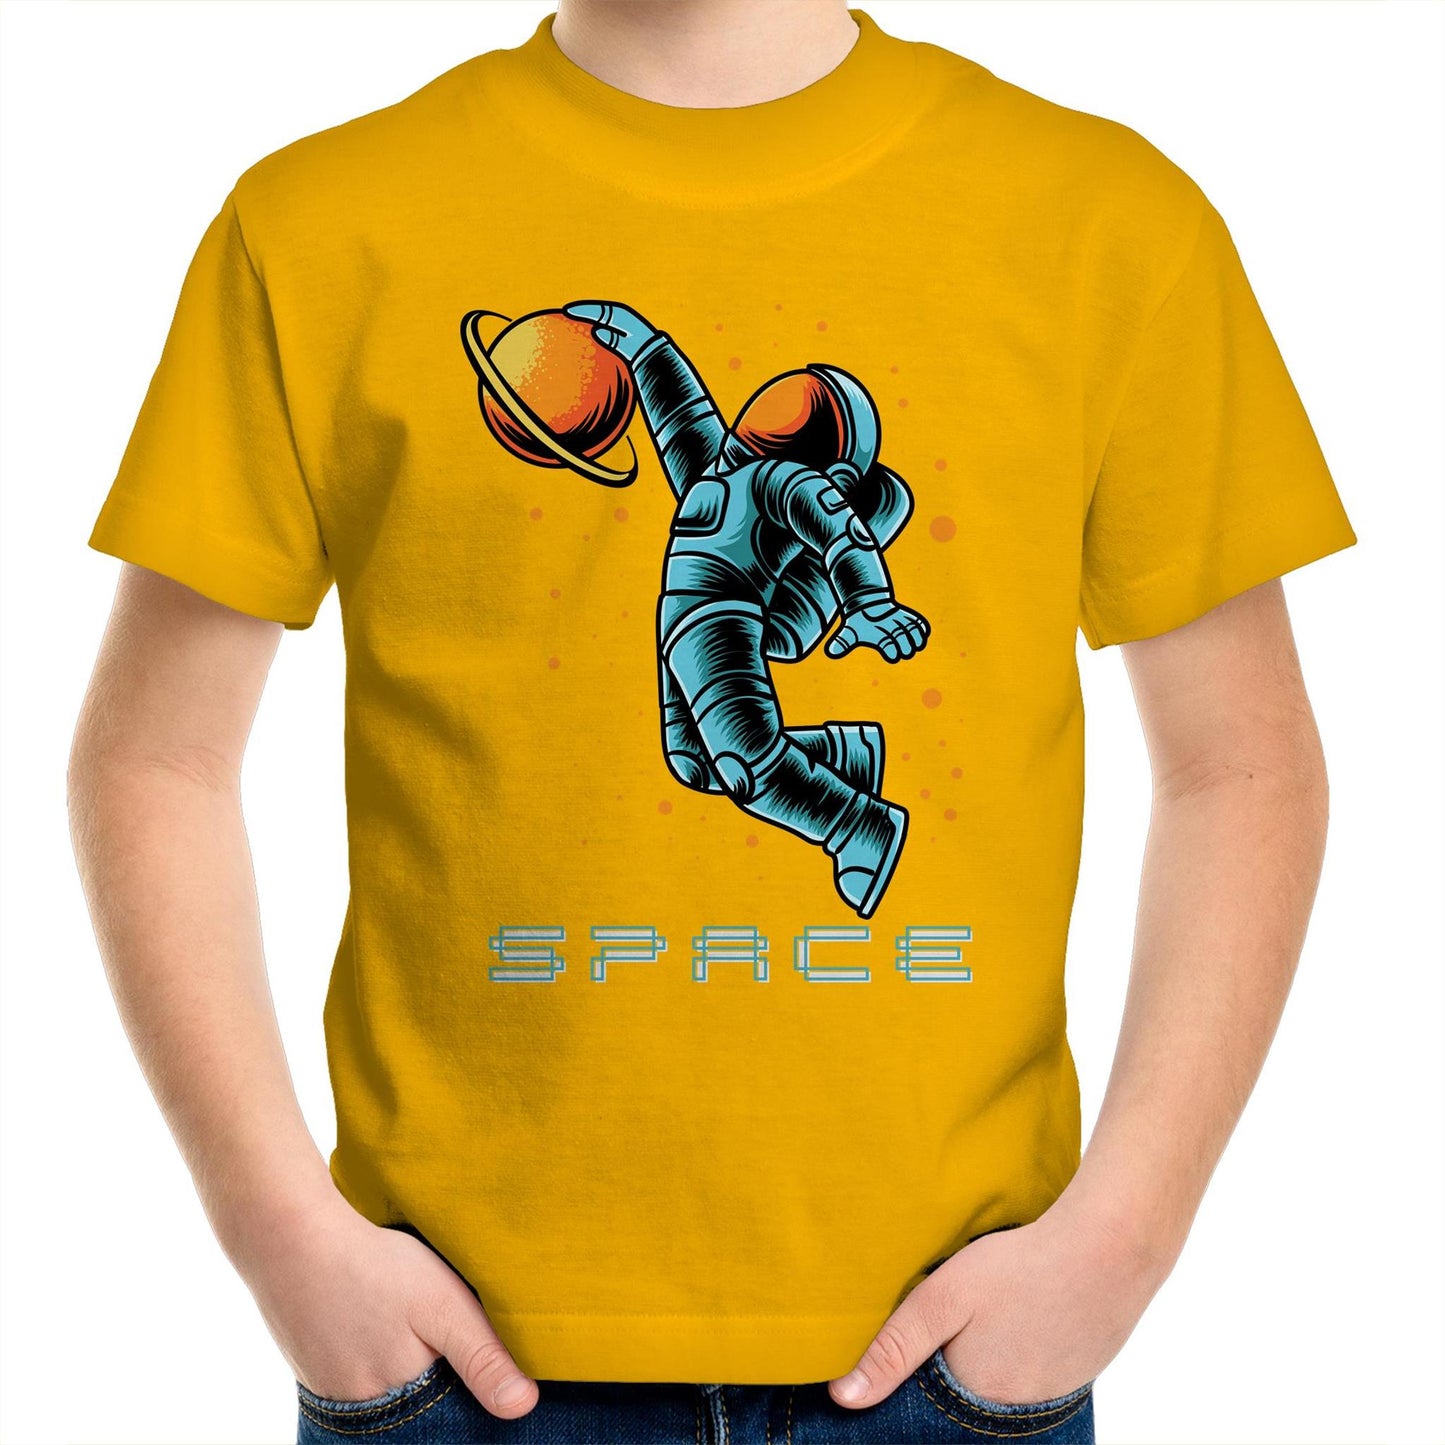 Astronaut Basketball - Kids Youth Crew T-Shirt Gold Kids Youth T-shirt Space